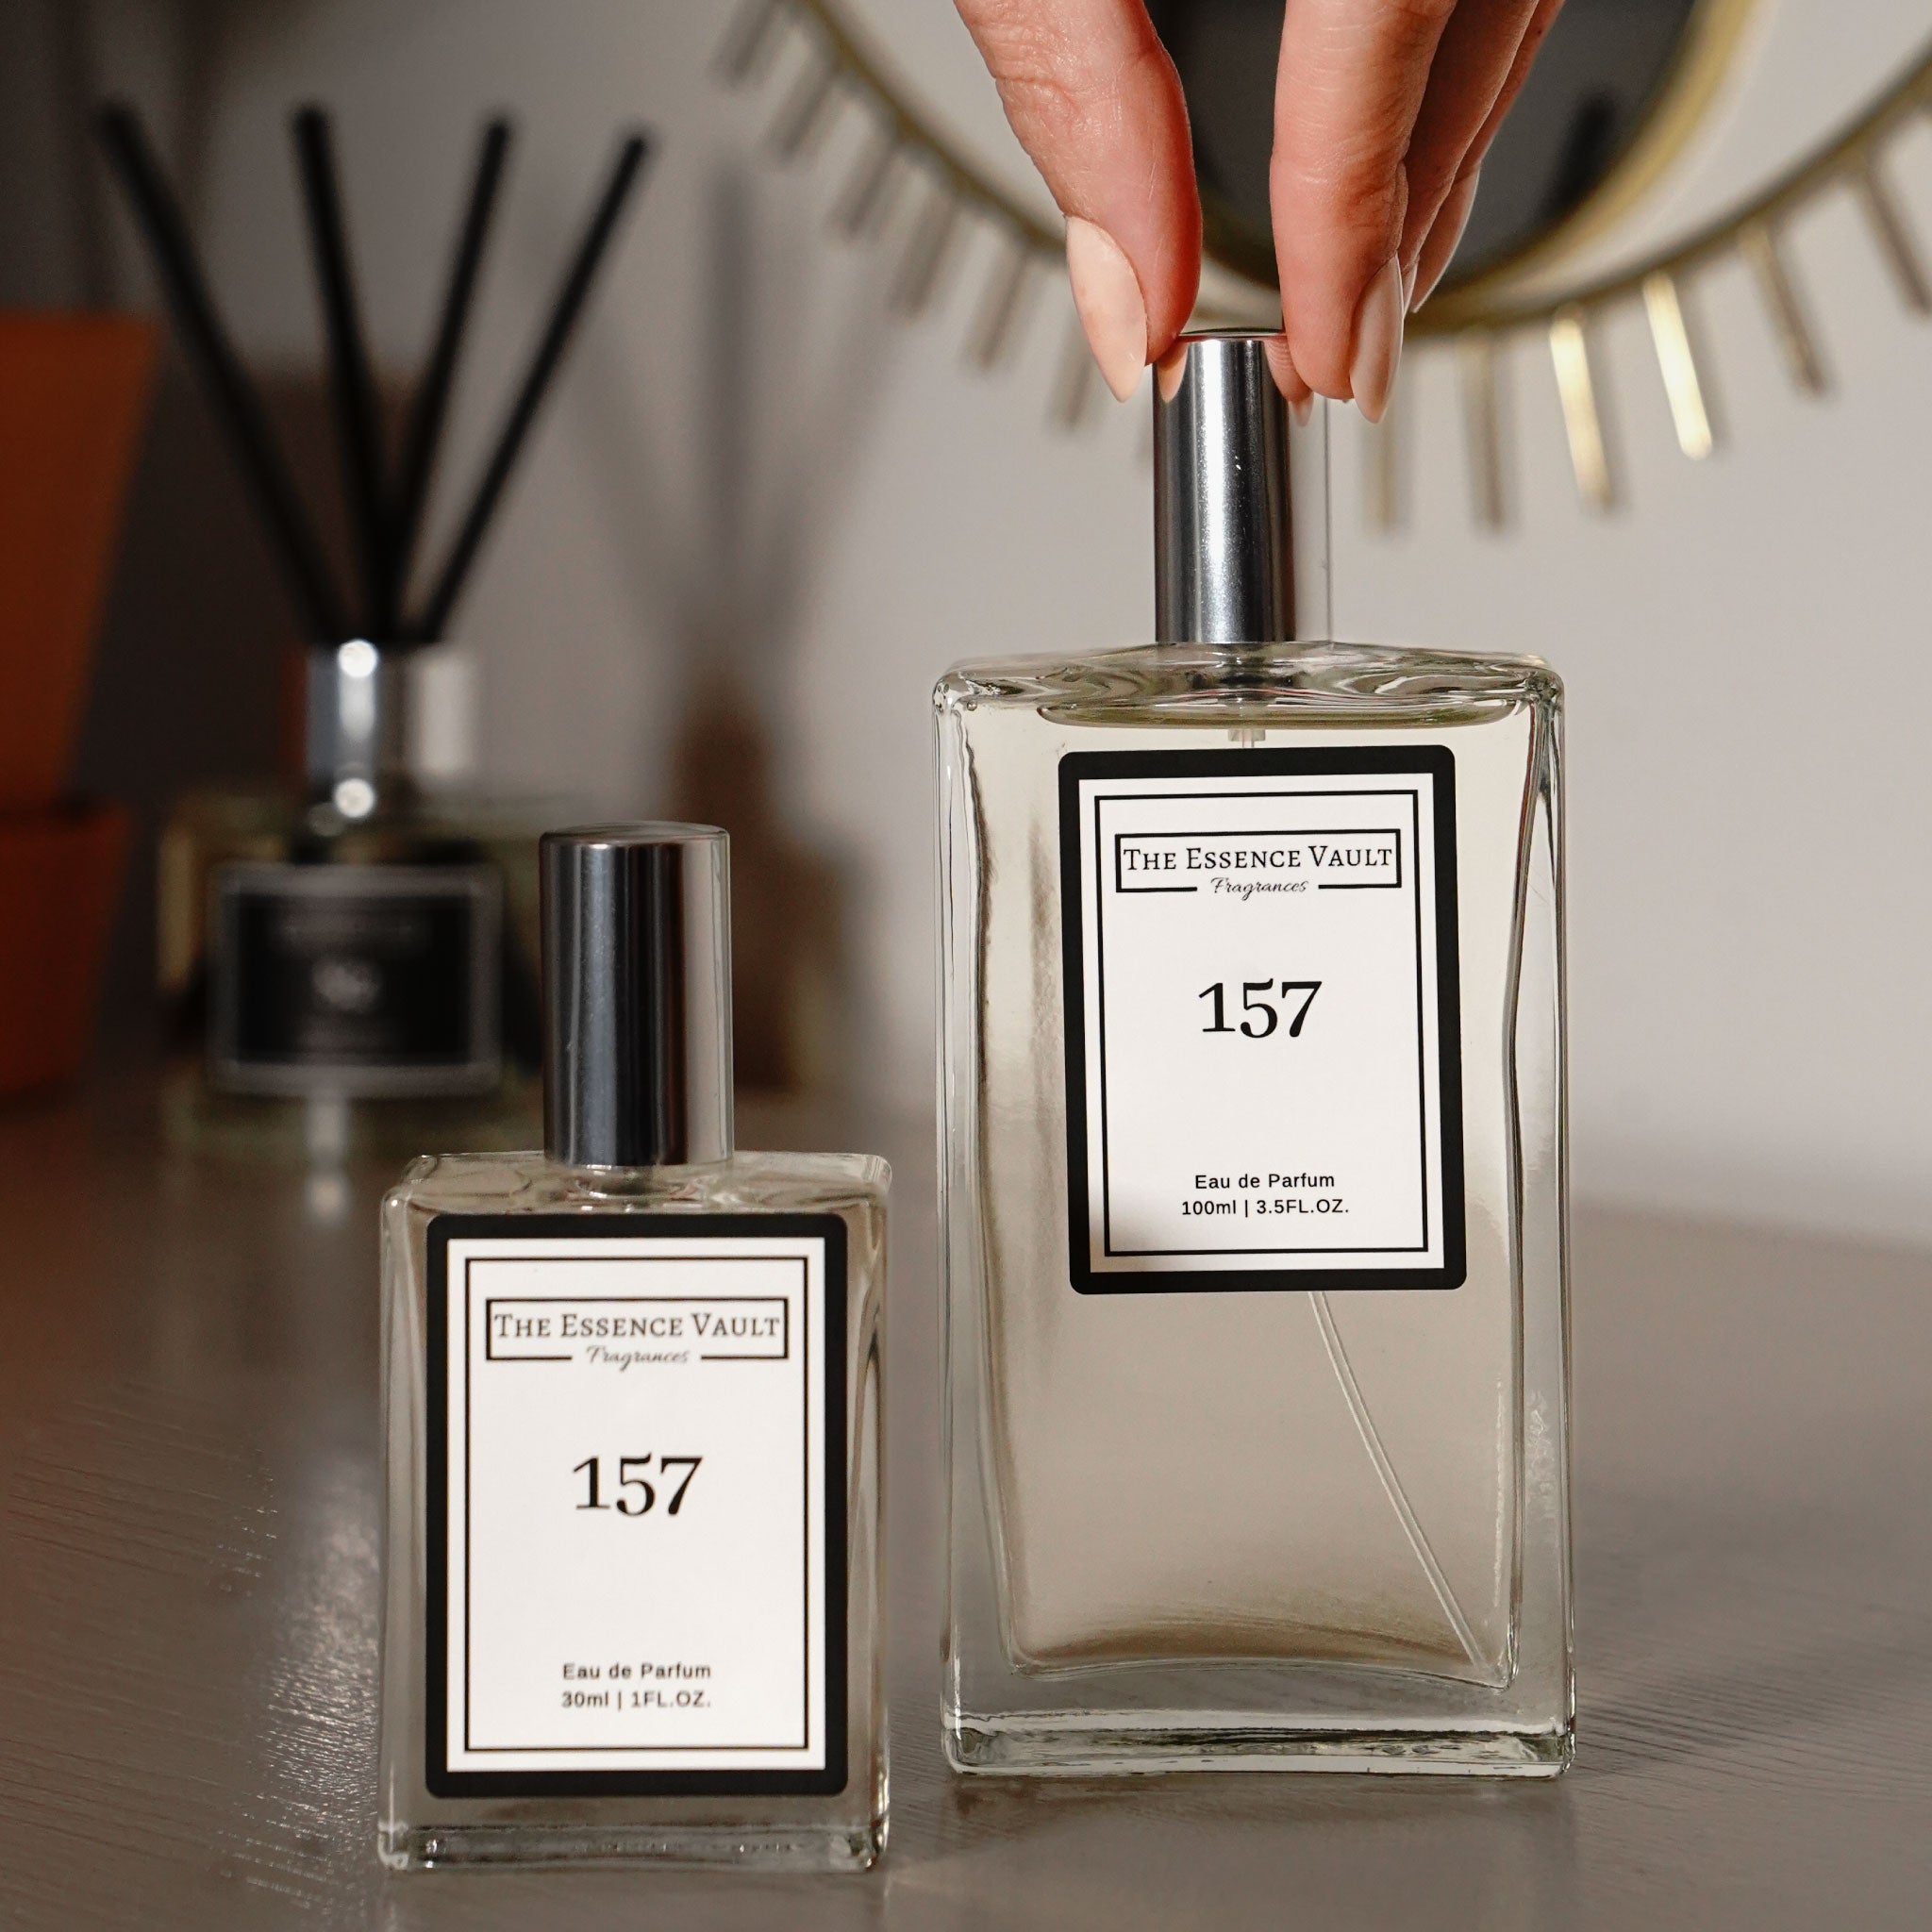 Inspired by Orange, Rose and Patchouli - 37 – The Essence Vault